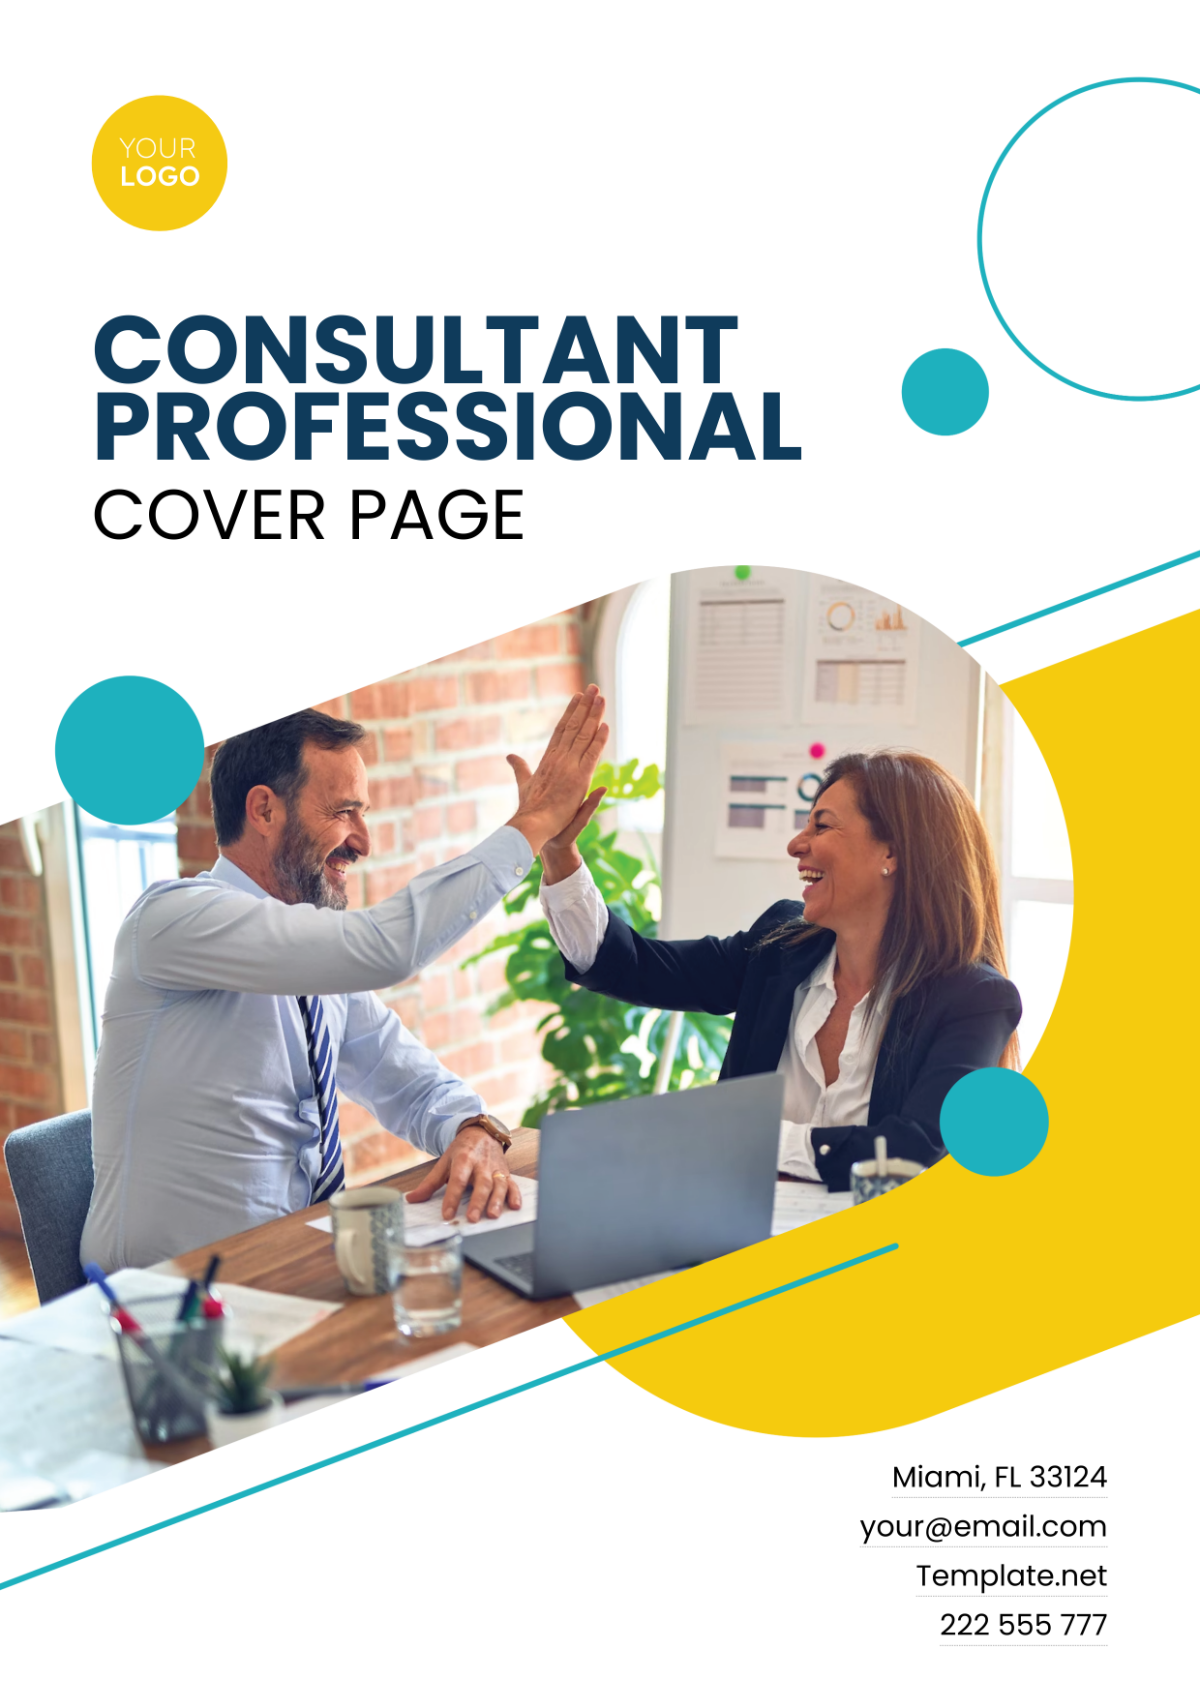 Consultant Professional Cover Page